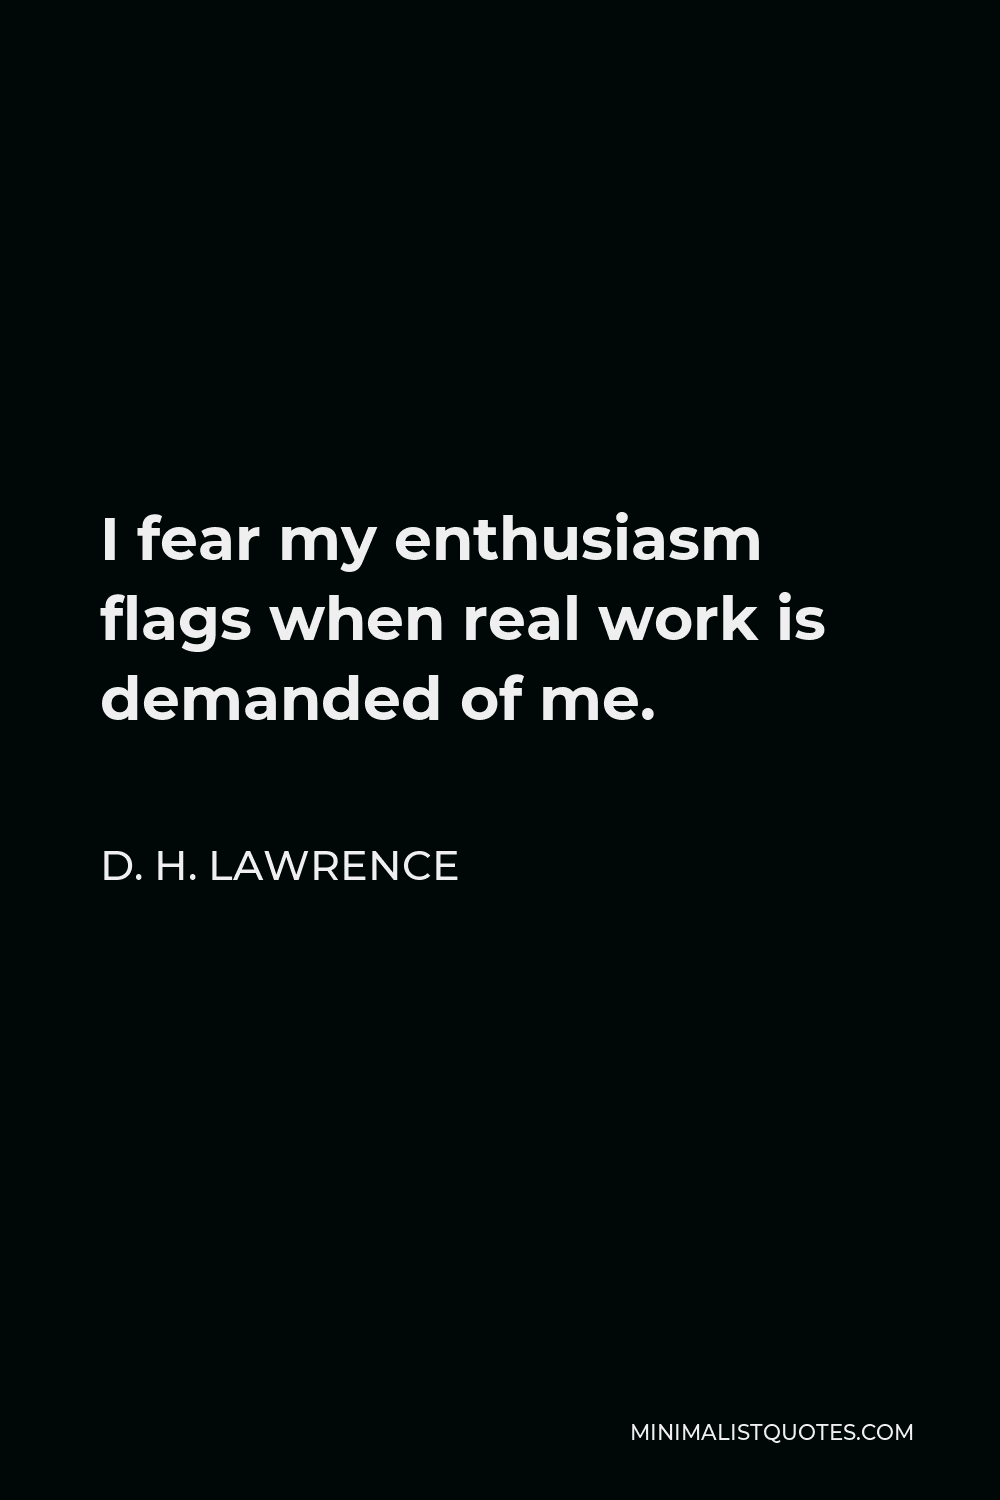 D. H. Lawrence Quote - I fear my enthusiasm flags when real work is demanded of me.